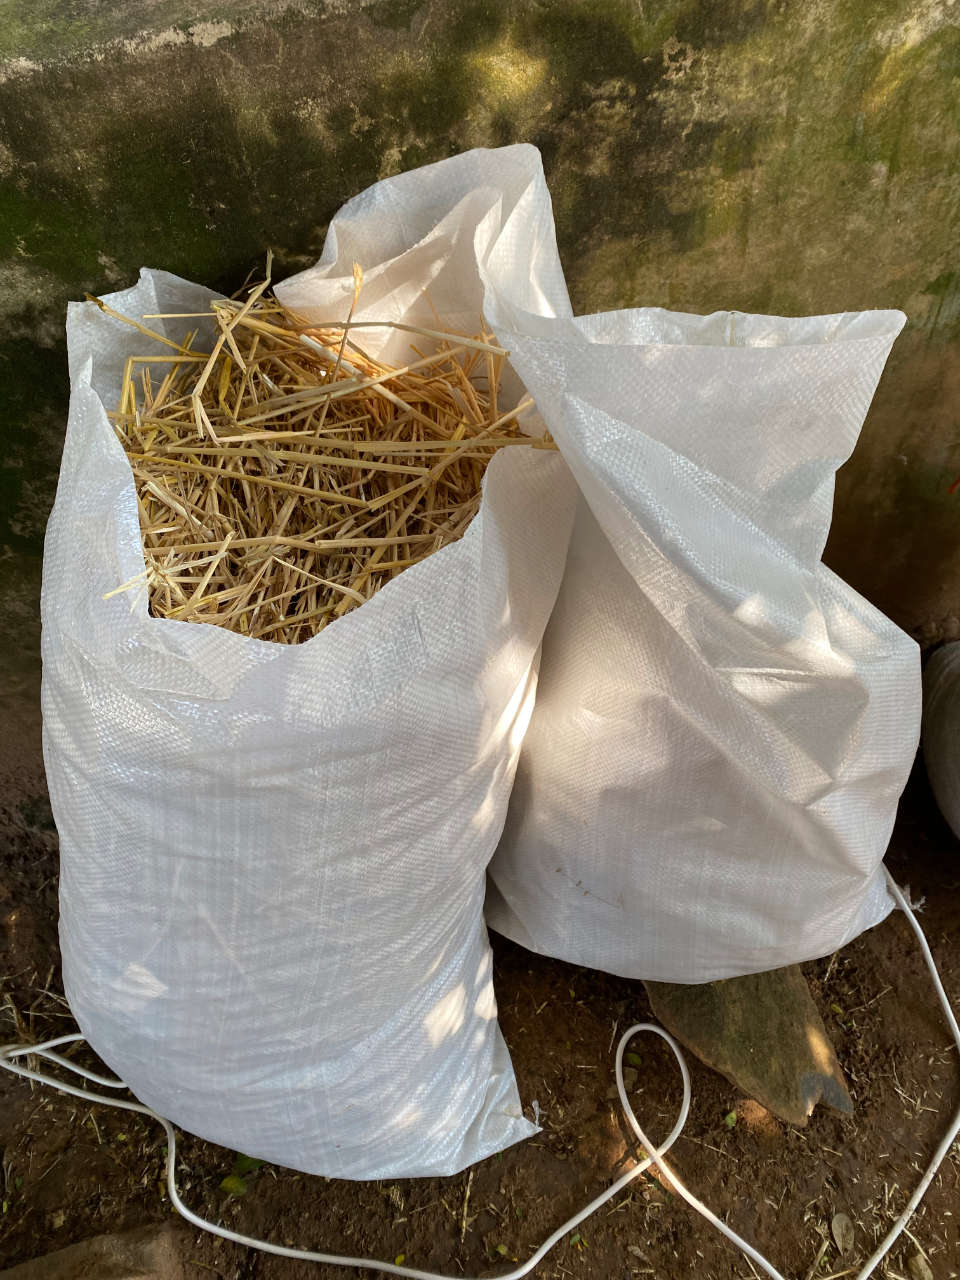 bags of straw